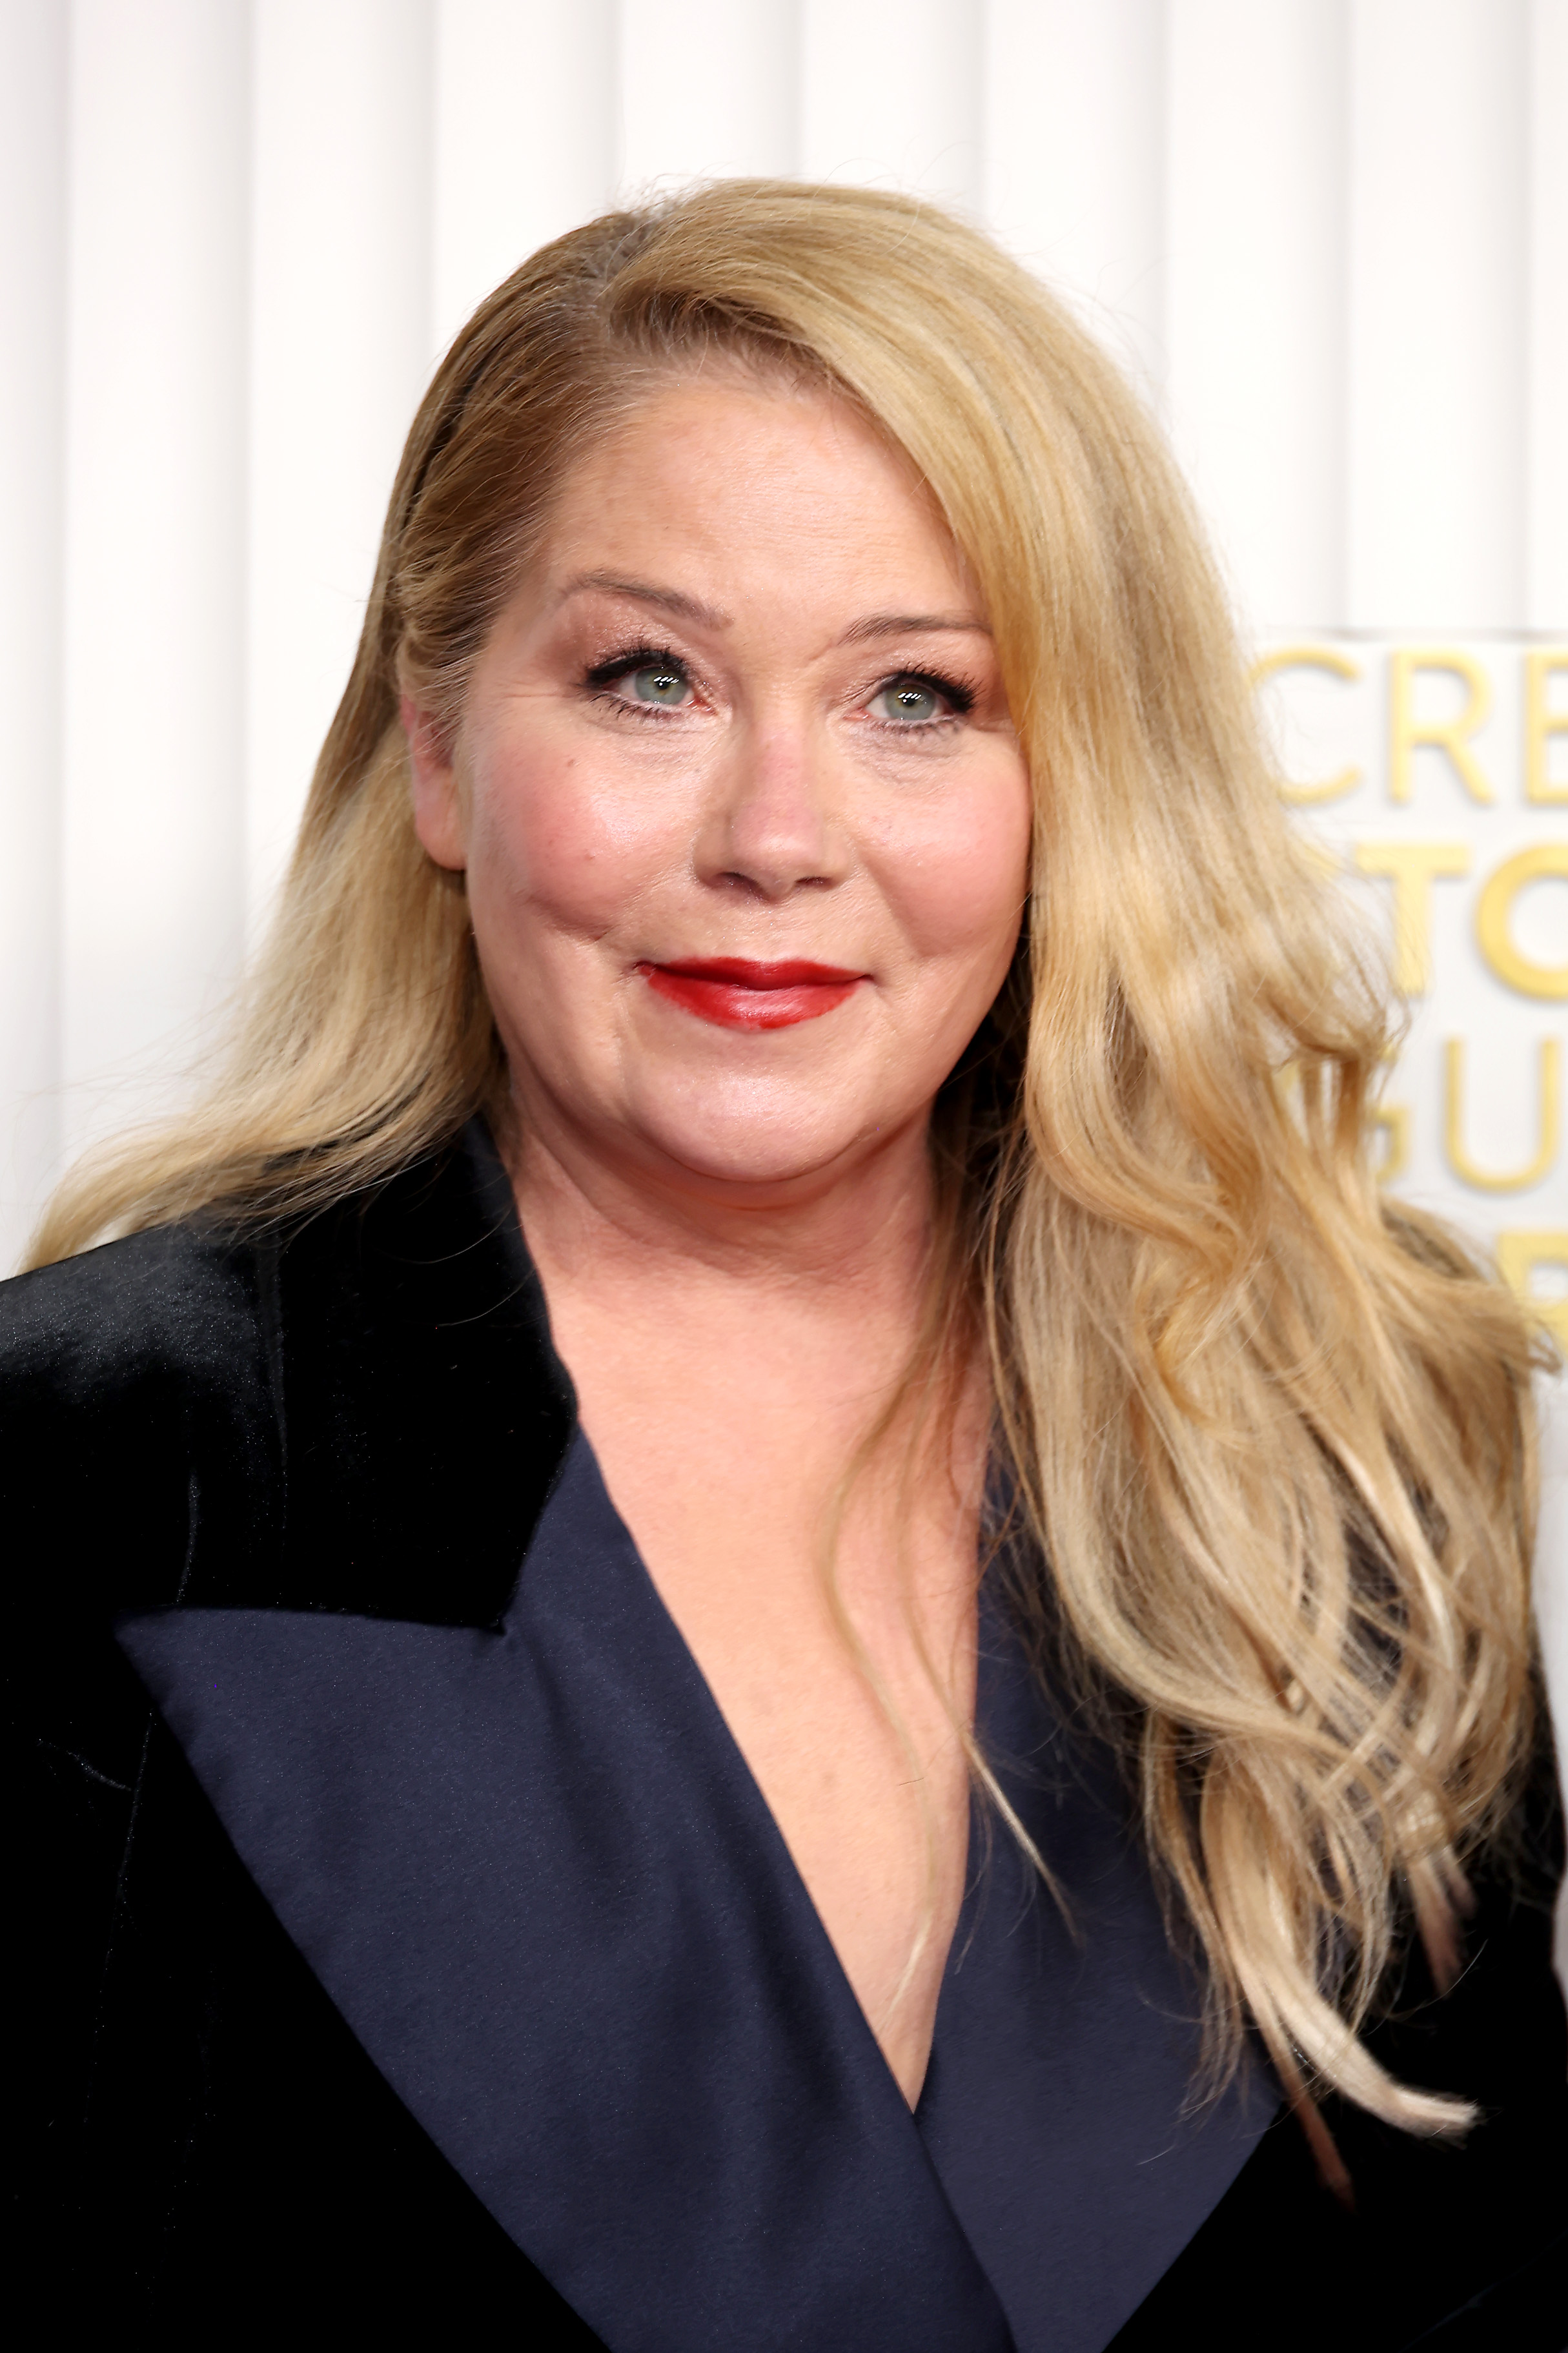 Christina Applegate attends the 29th Annual Screen Actors Guild Awards at Fairmont Century Plaza in Los Angeles, California, on February 26, 2023. | Source: Getty Images